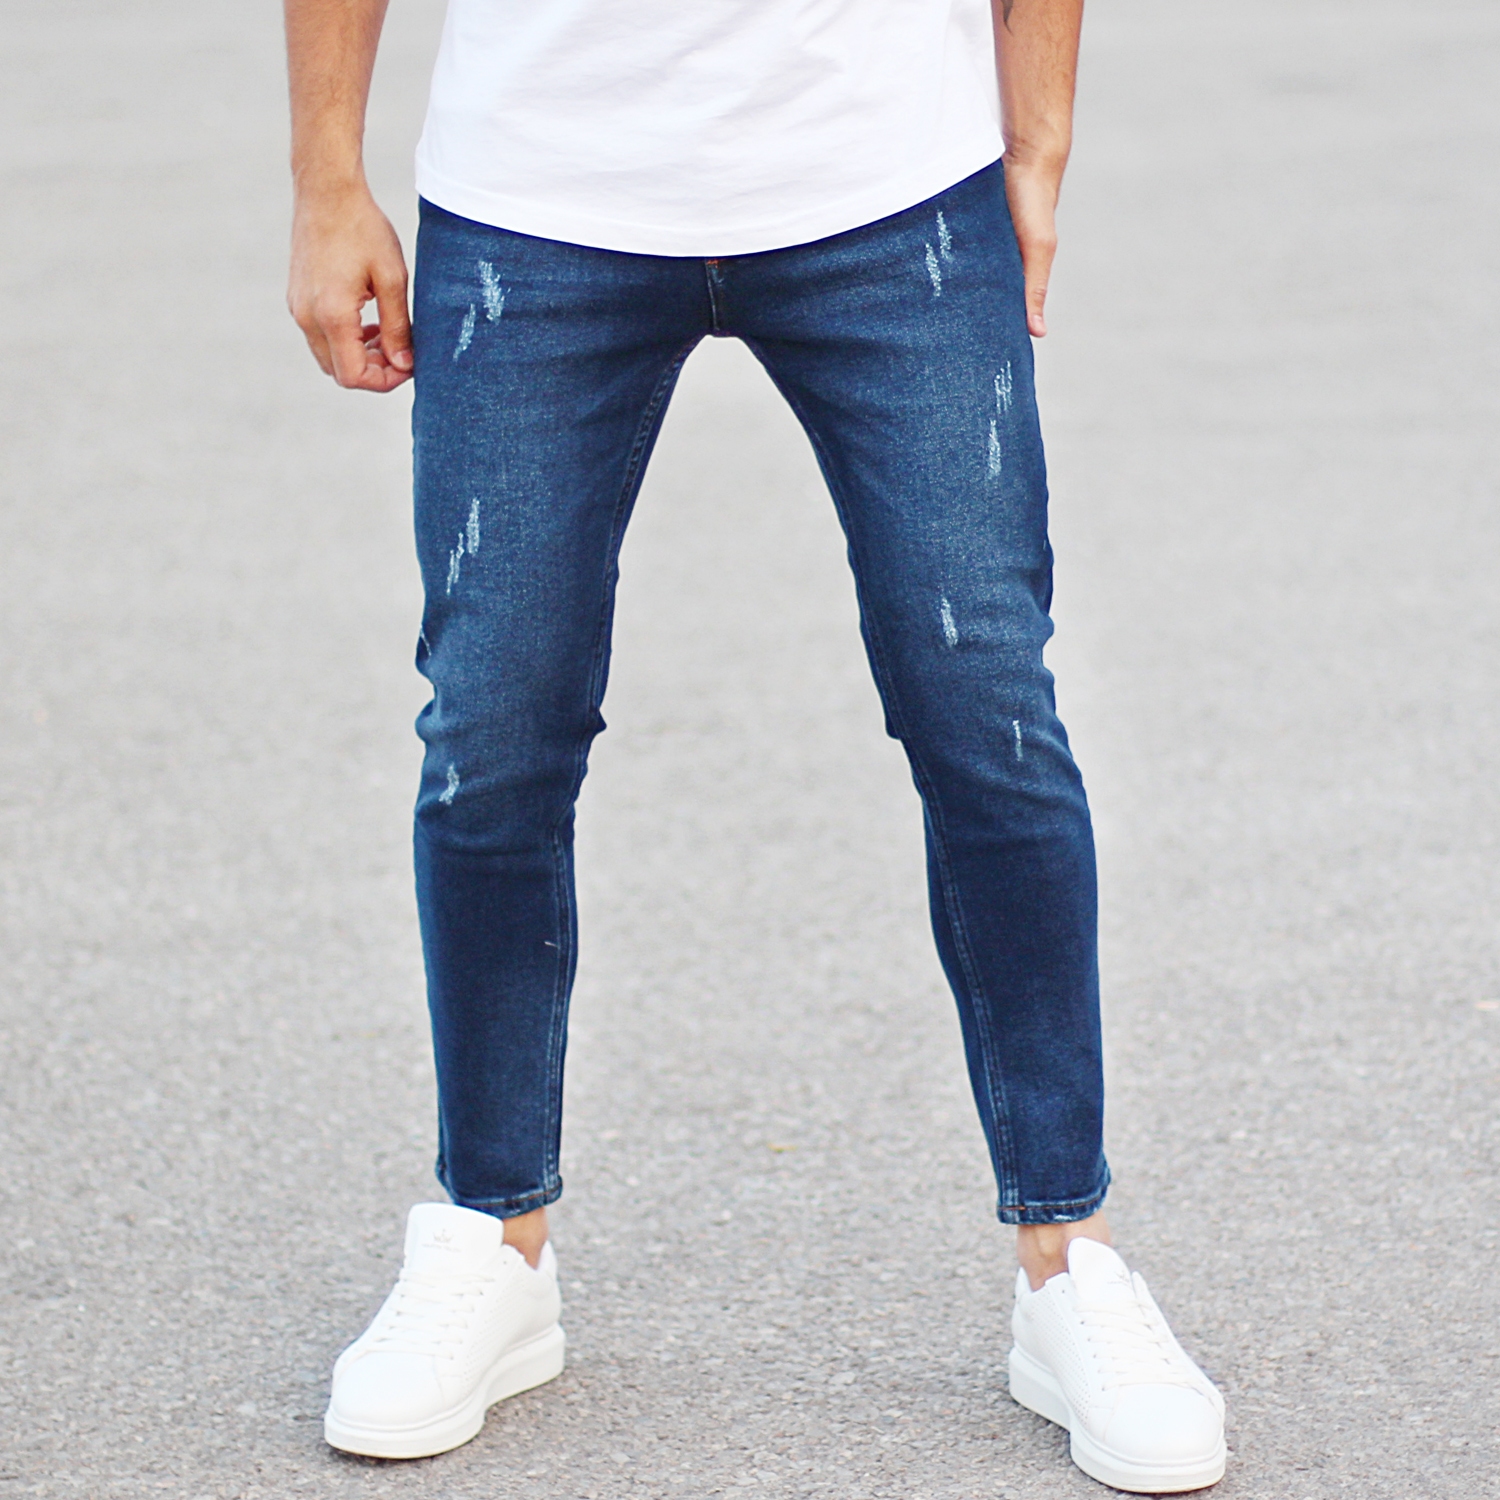 dark jeans with rips